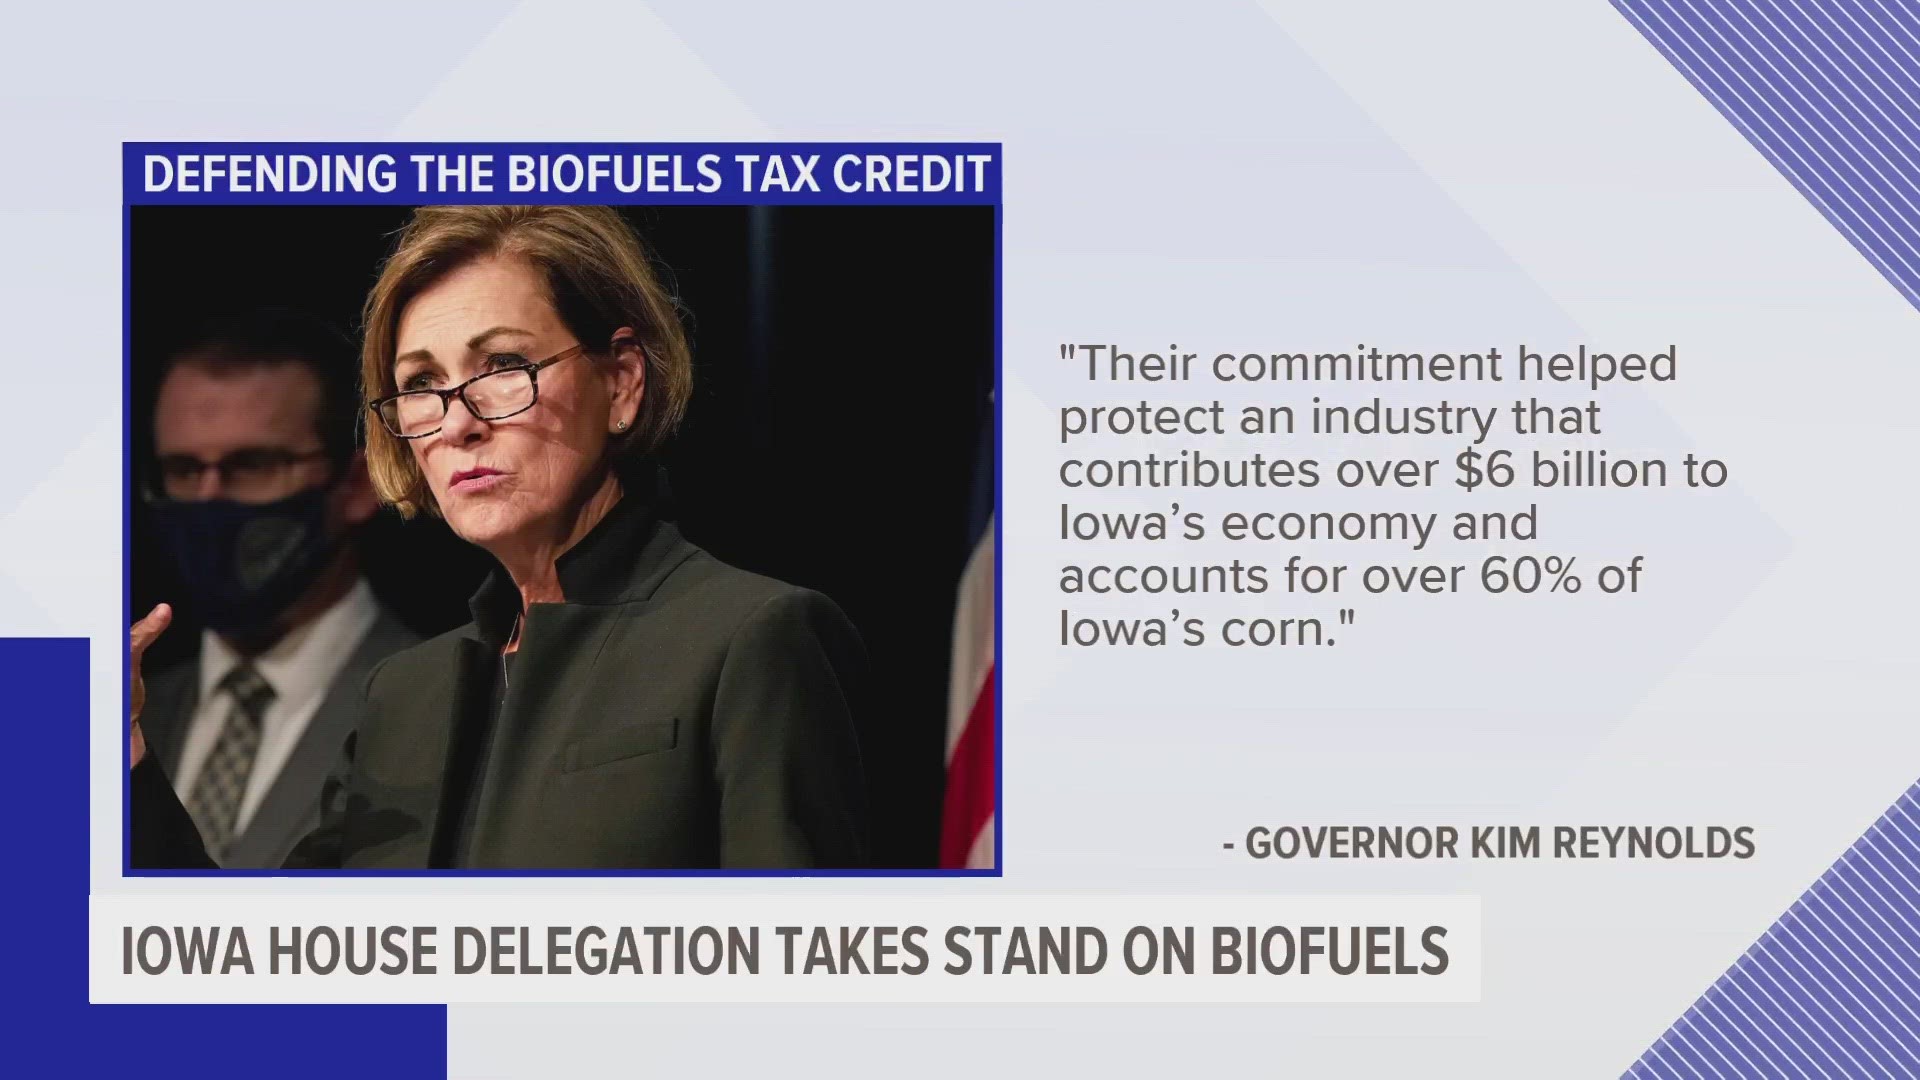 Gov. Kim Reynolds praised their work, saying in part "Their commitment helped protect an industry that contributes over six billion dollars to Iowa's economy."